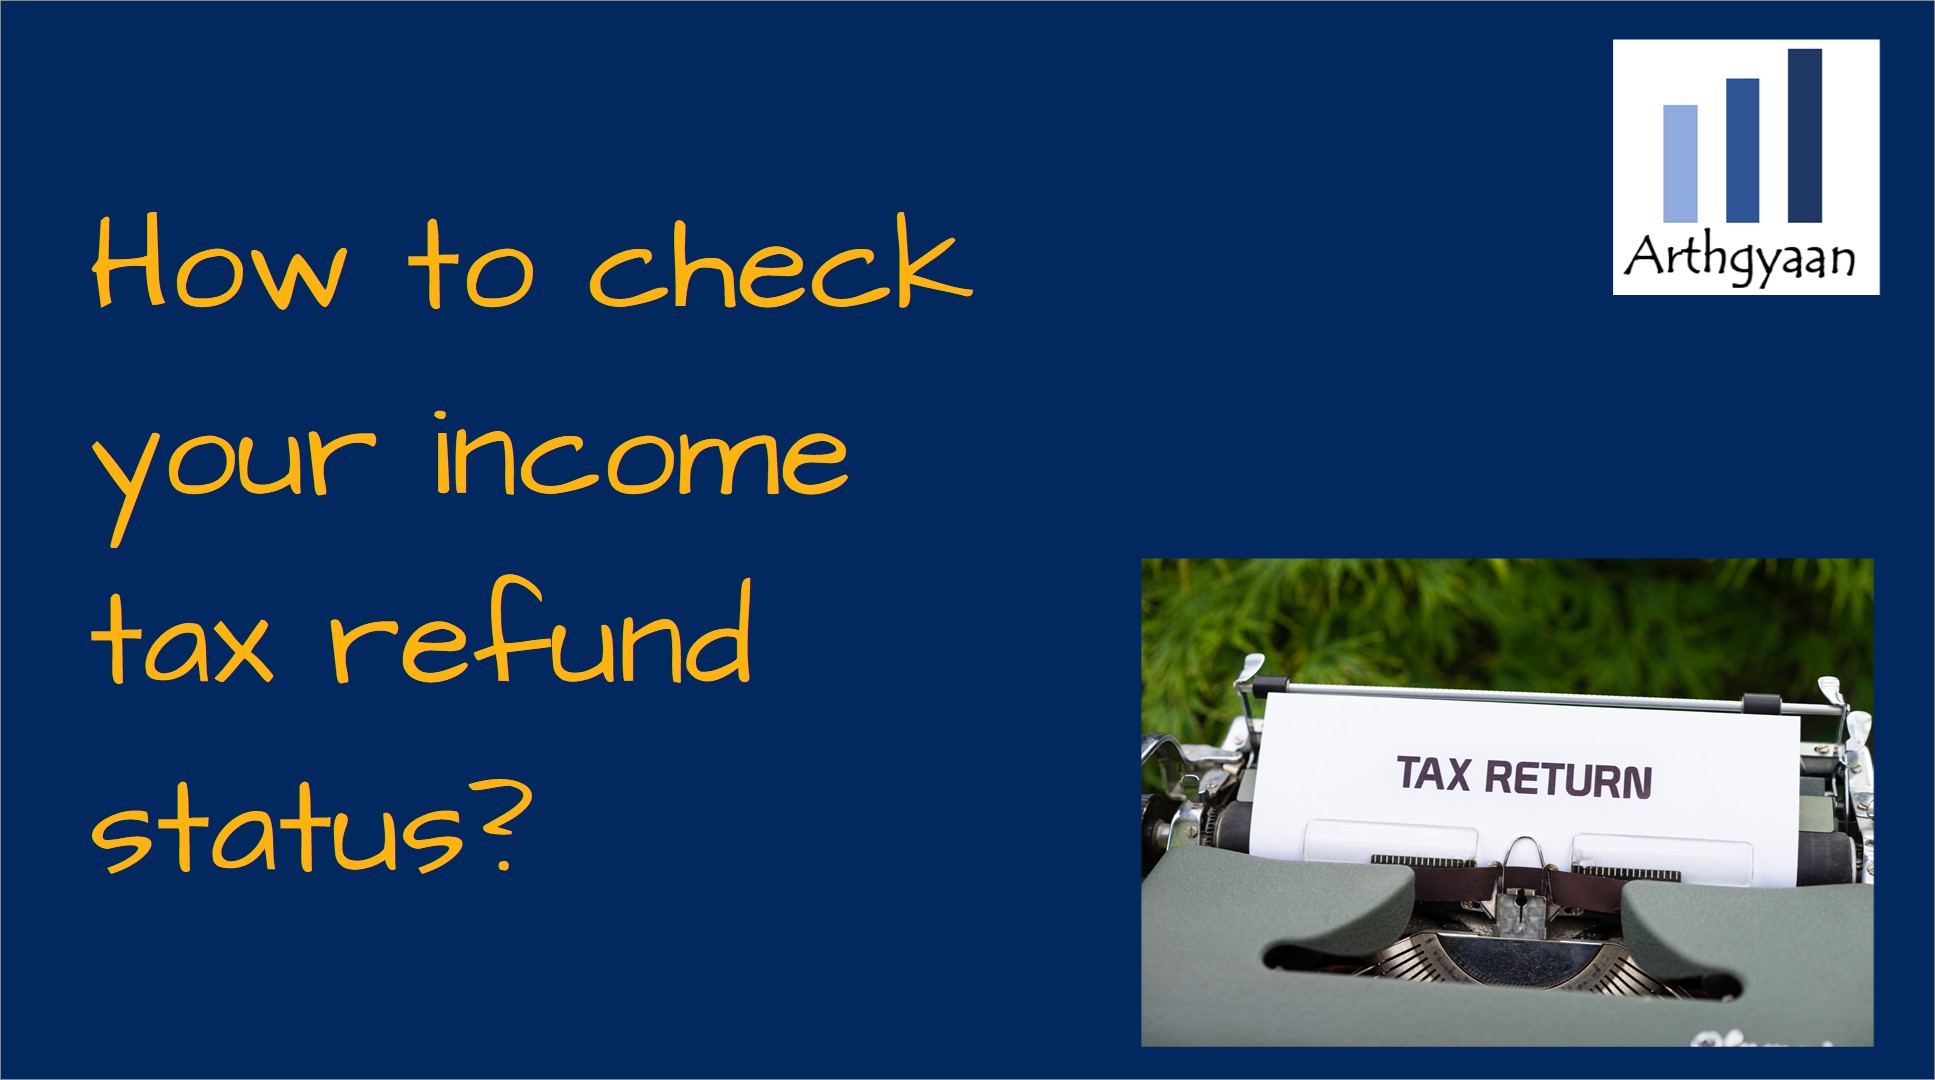 How to check your income tax refund status?